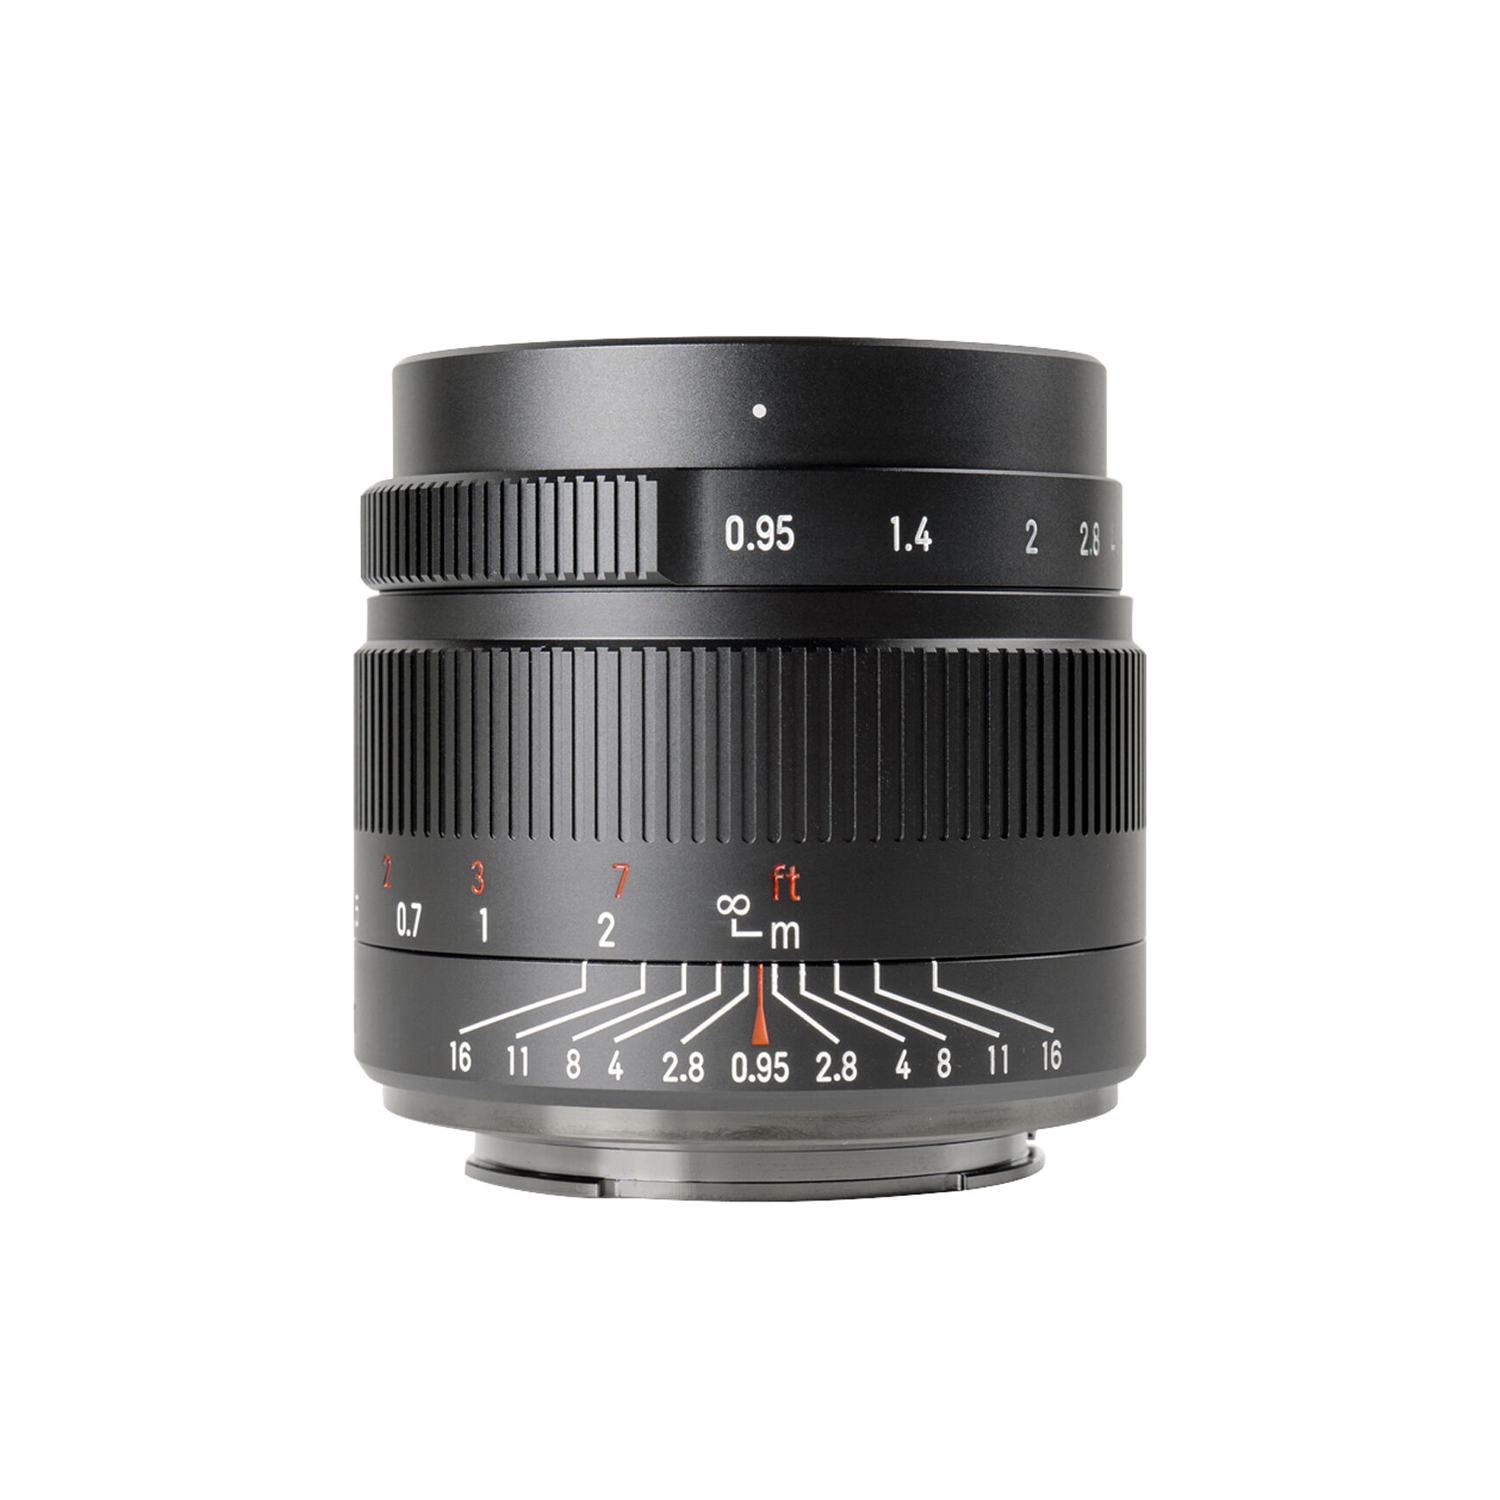 7artisans Photoelectric 35mm f/0.95 Lens for Micro Four Thirds Mount